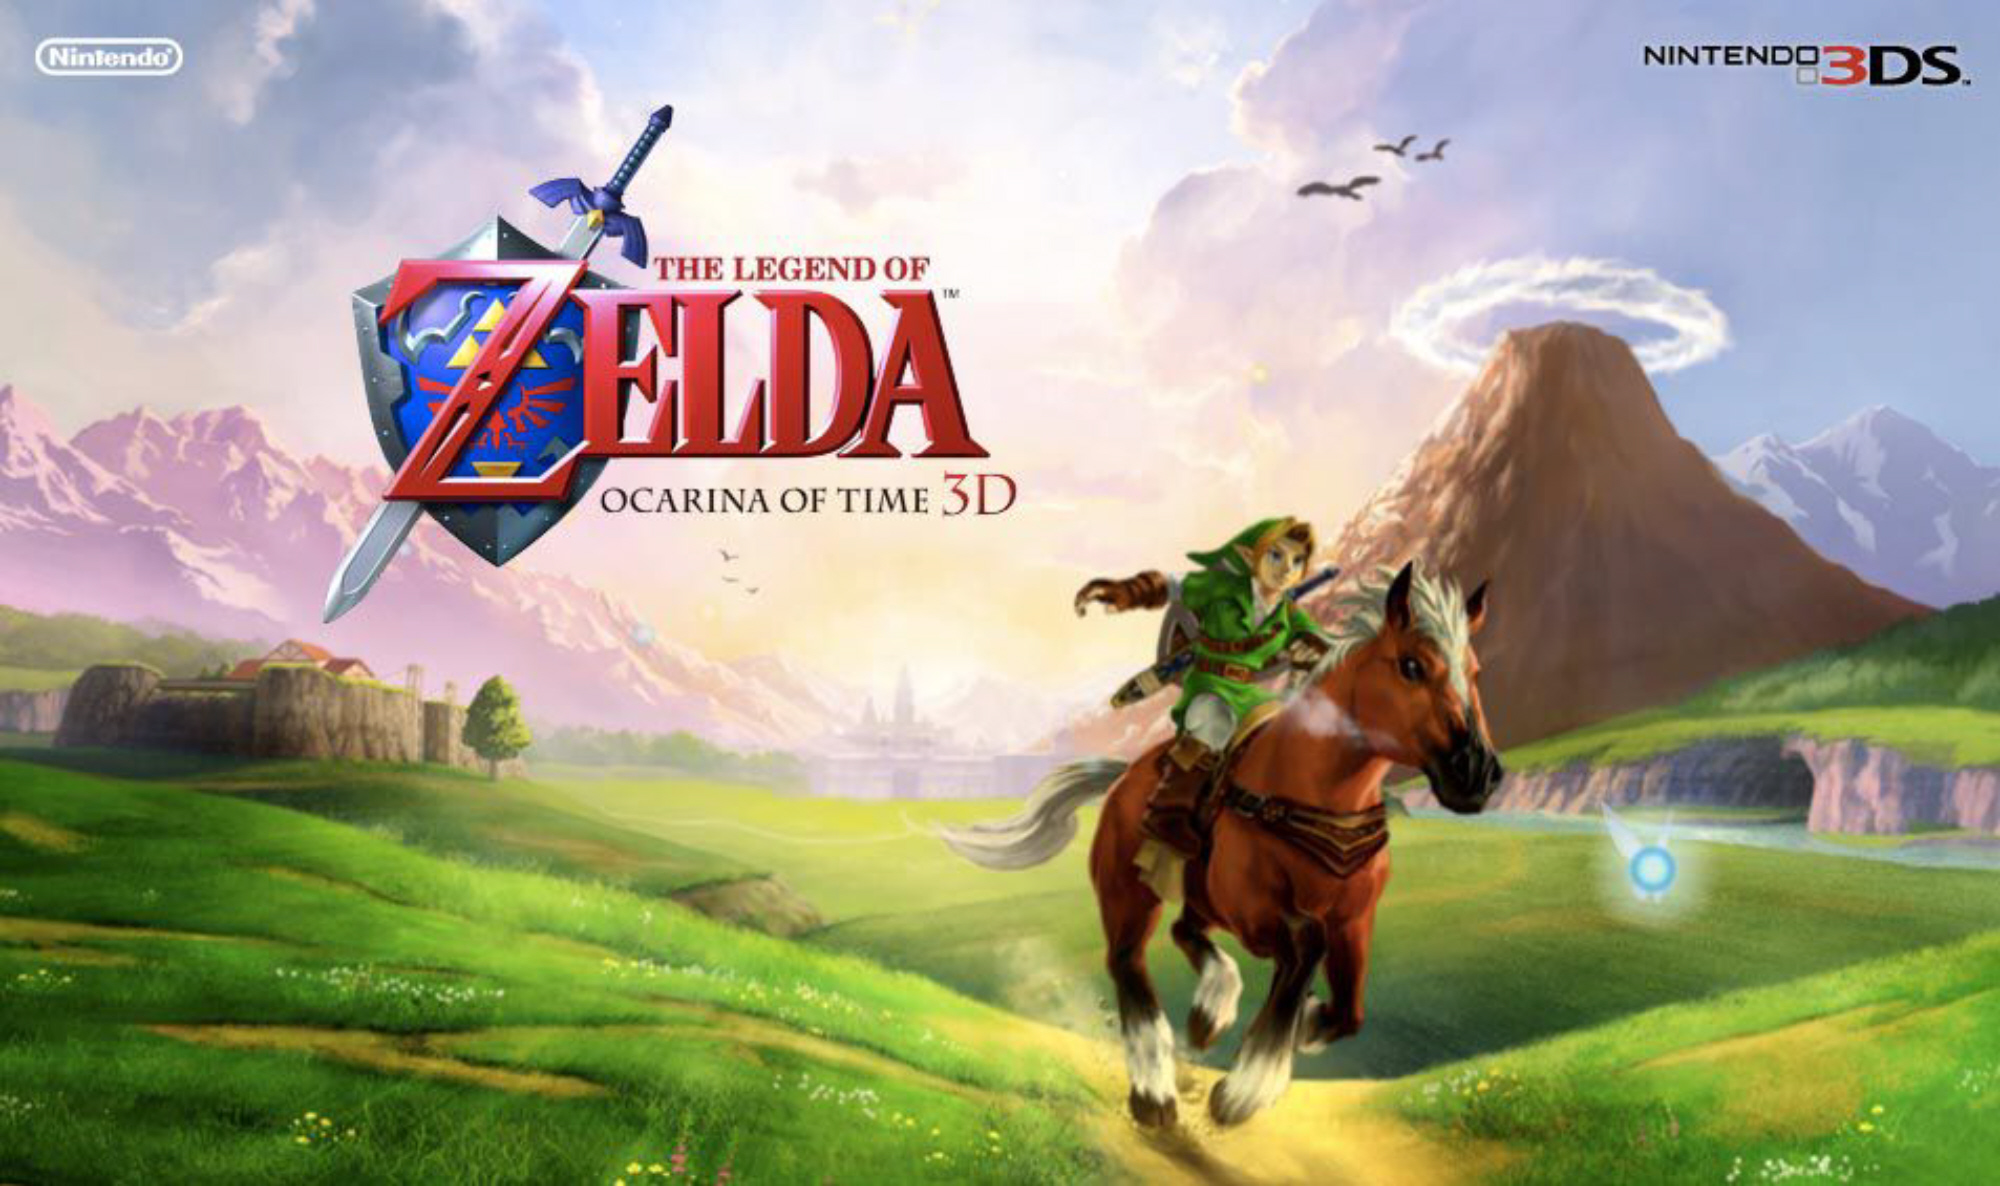 CHEATS FOR THE LEGEND OF ZELDA OCARINA OF TIME